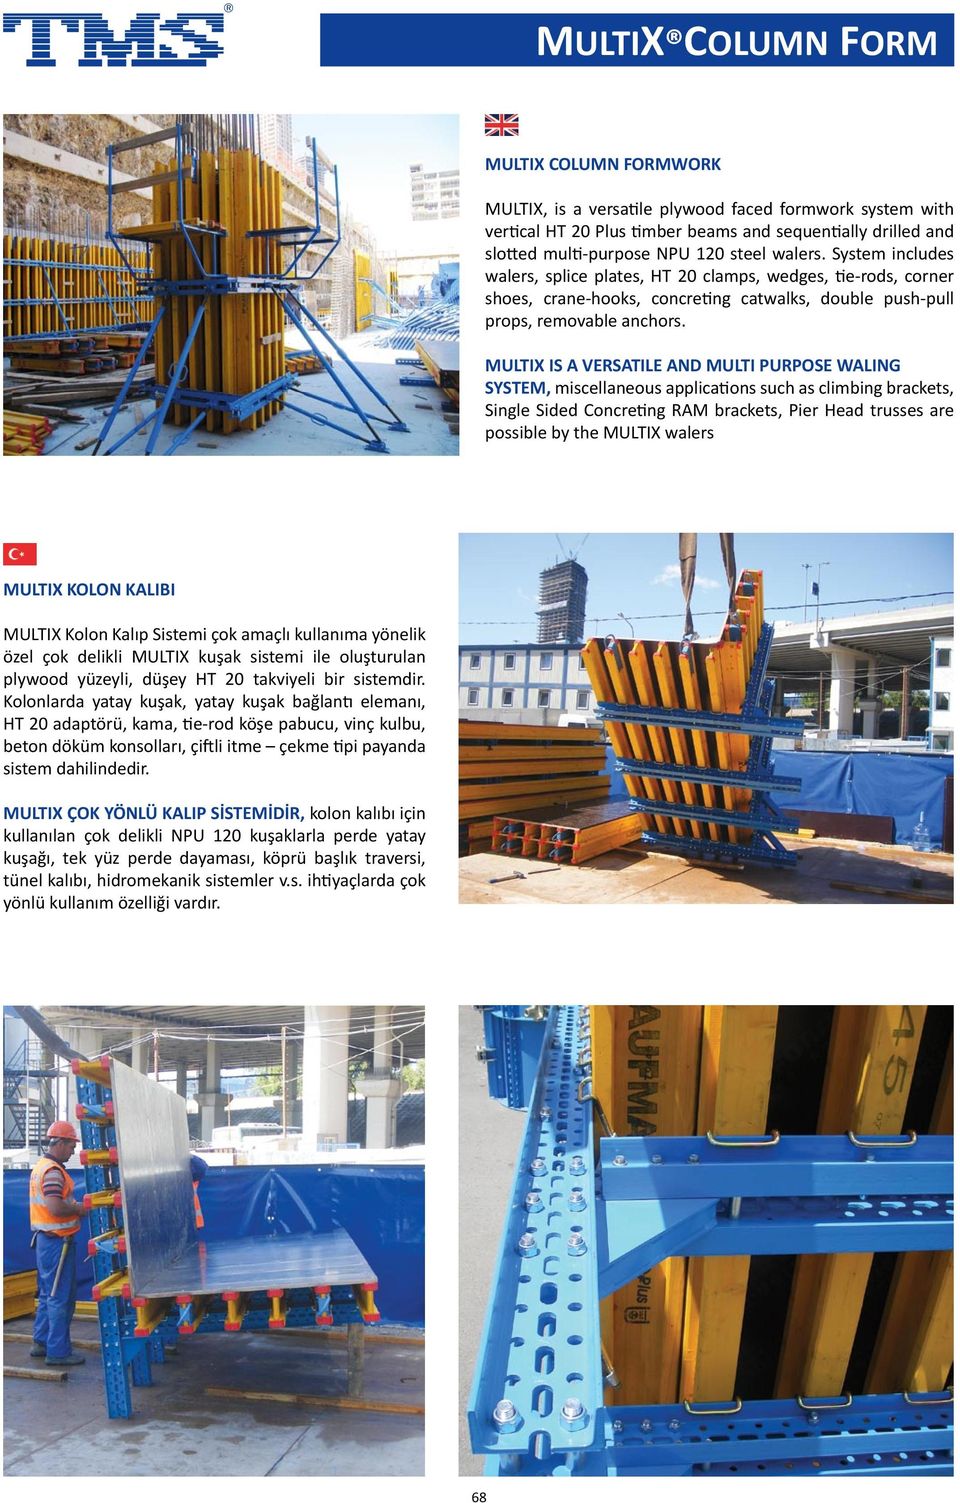 MULTIX IS A VERSATILE AND MULTI PURPOSE WALING SYSTEM, miscellaneous applications such as climbing brackets, Single Sided Concreting RAM brackets, Pier Head trusses are possible by the MULTIX walers